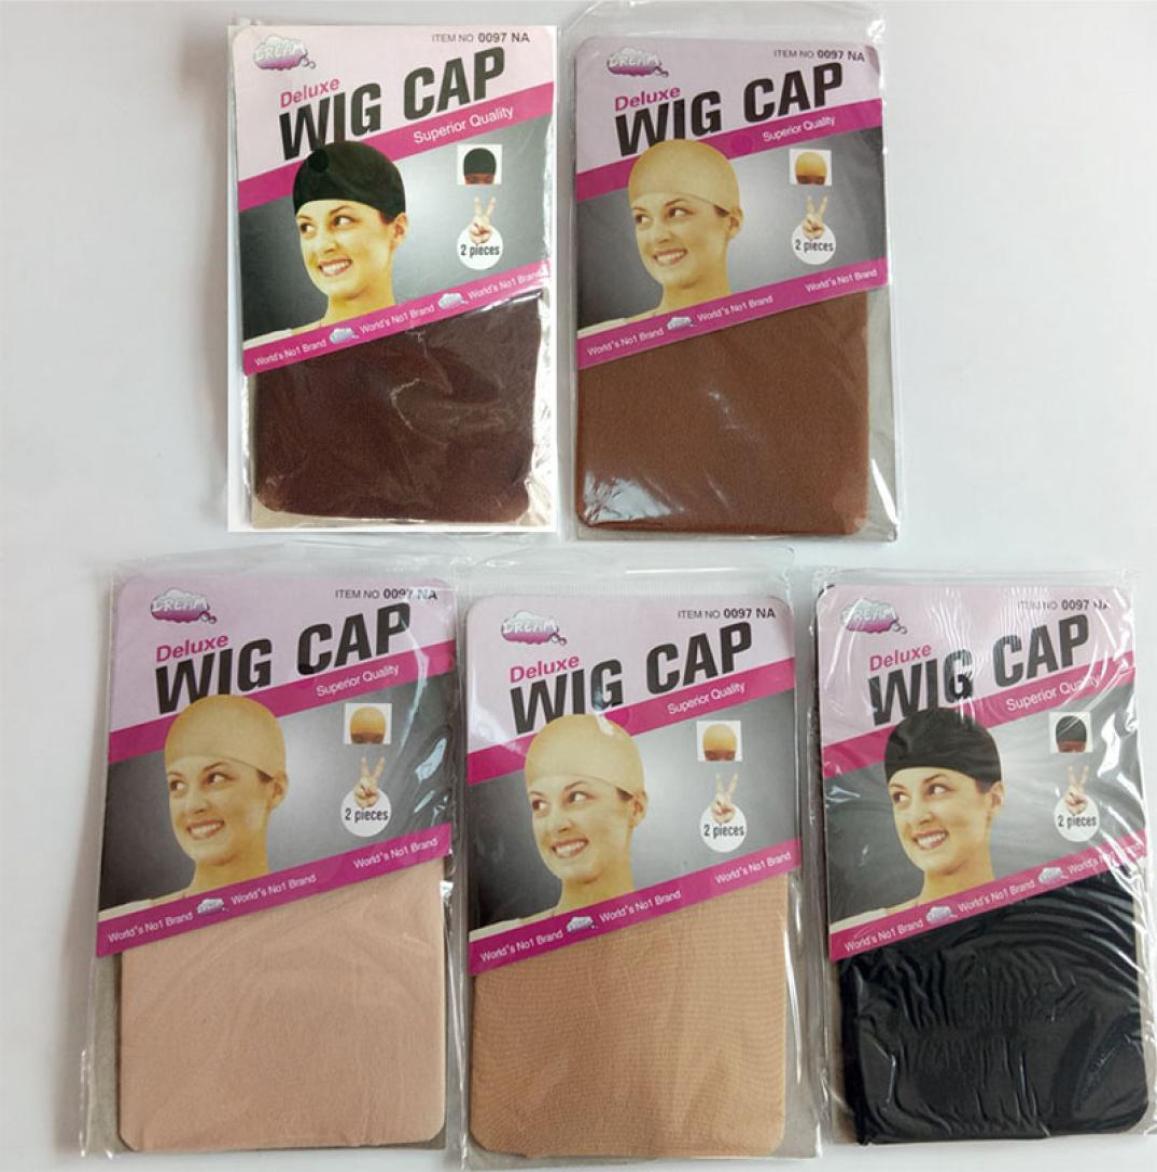 

12 Pieces Clearance Quality Deluxe Wig Cap Hair Net For Weave Hair Wig Nets Stretch Mesh Wig Cap For Making Wigs size4632116